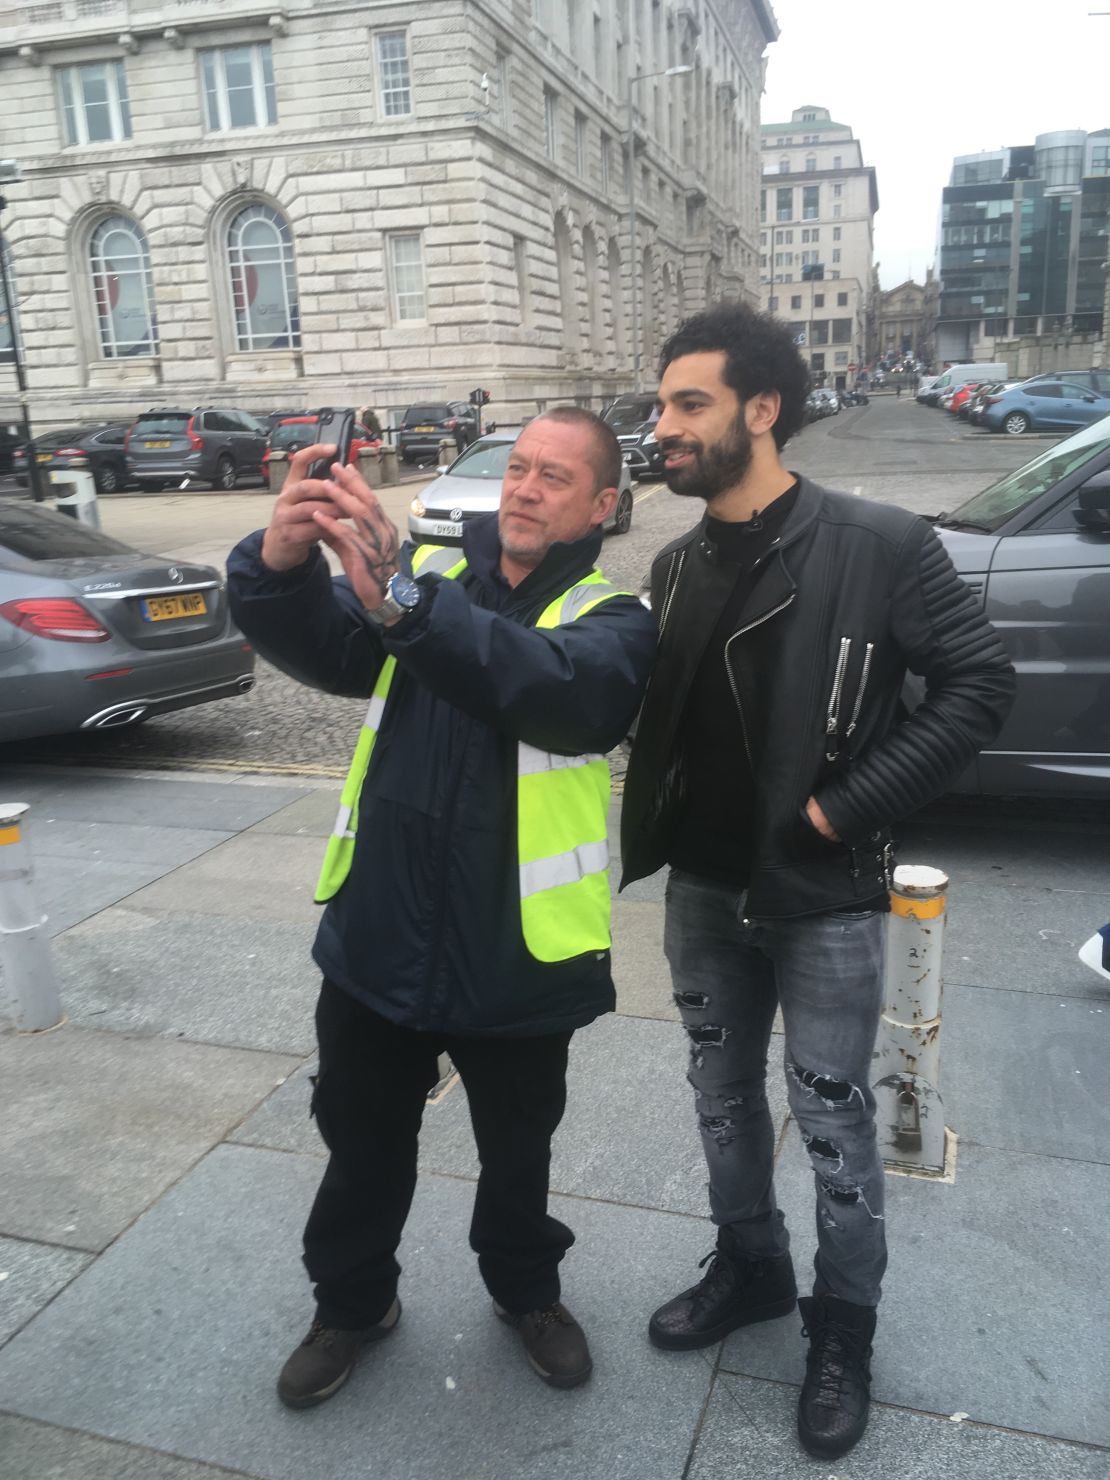 Salah pauses for a selfie with a fan while walking by the River Mersey.